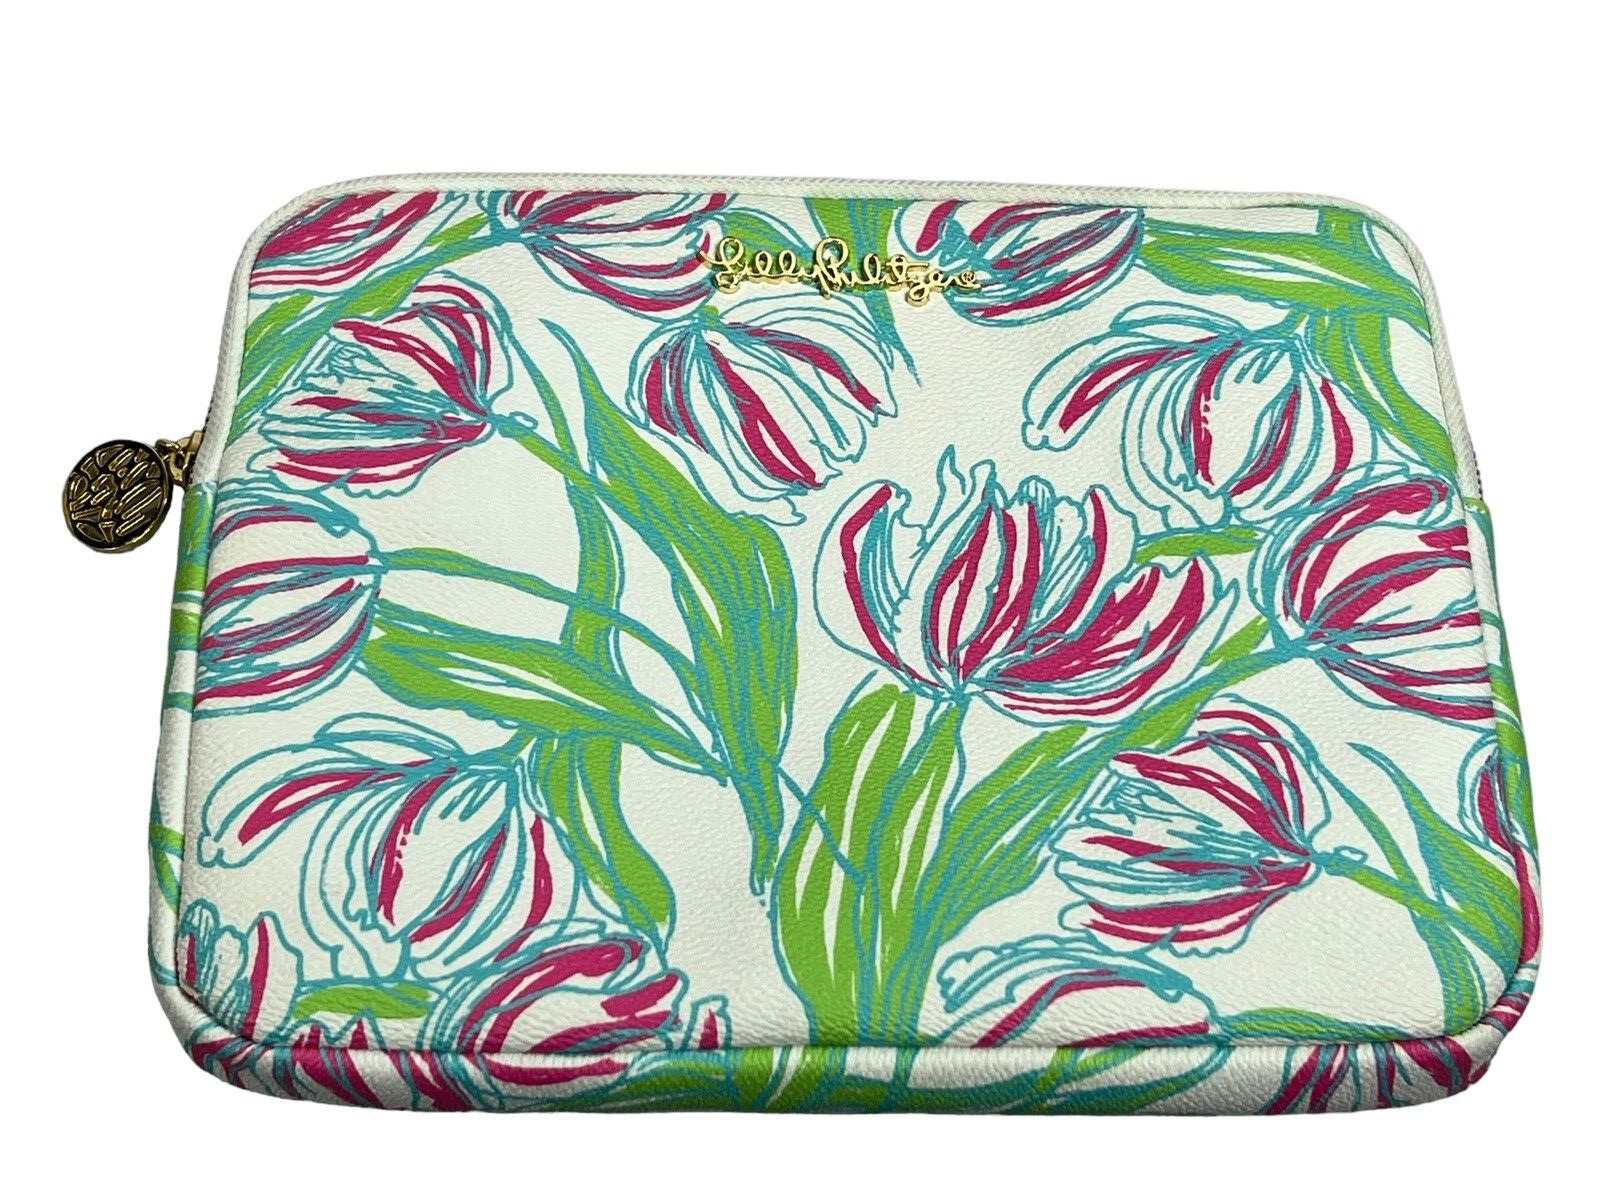 Lilly Pulitzer Padded iPad/Tablet Zipper Case Cover